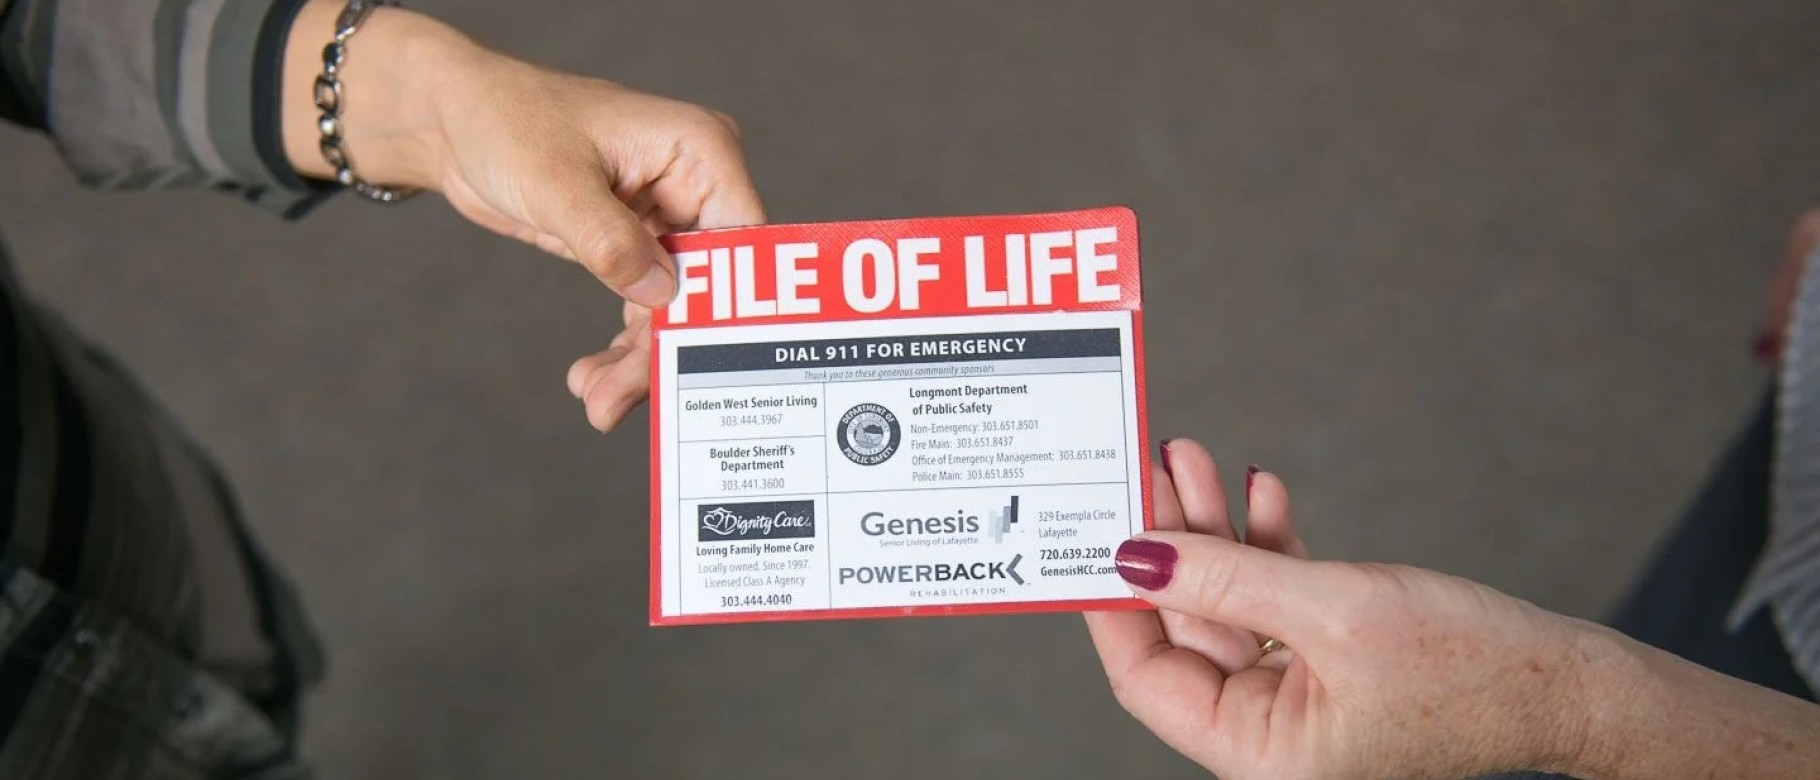 The File of Life pamphlet is shown being handed between two people